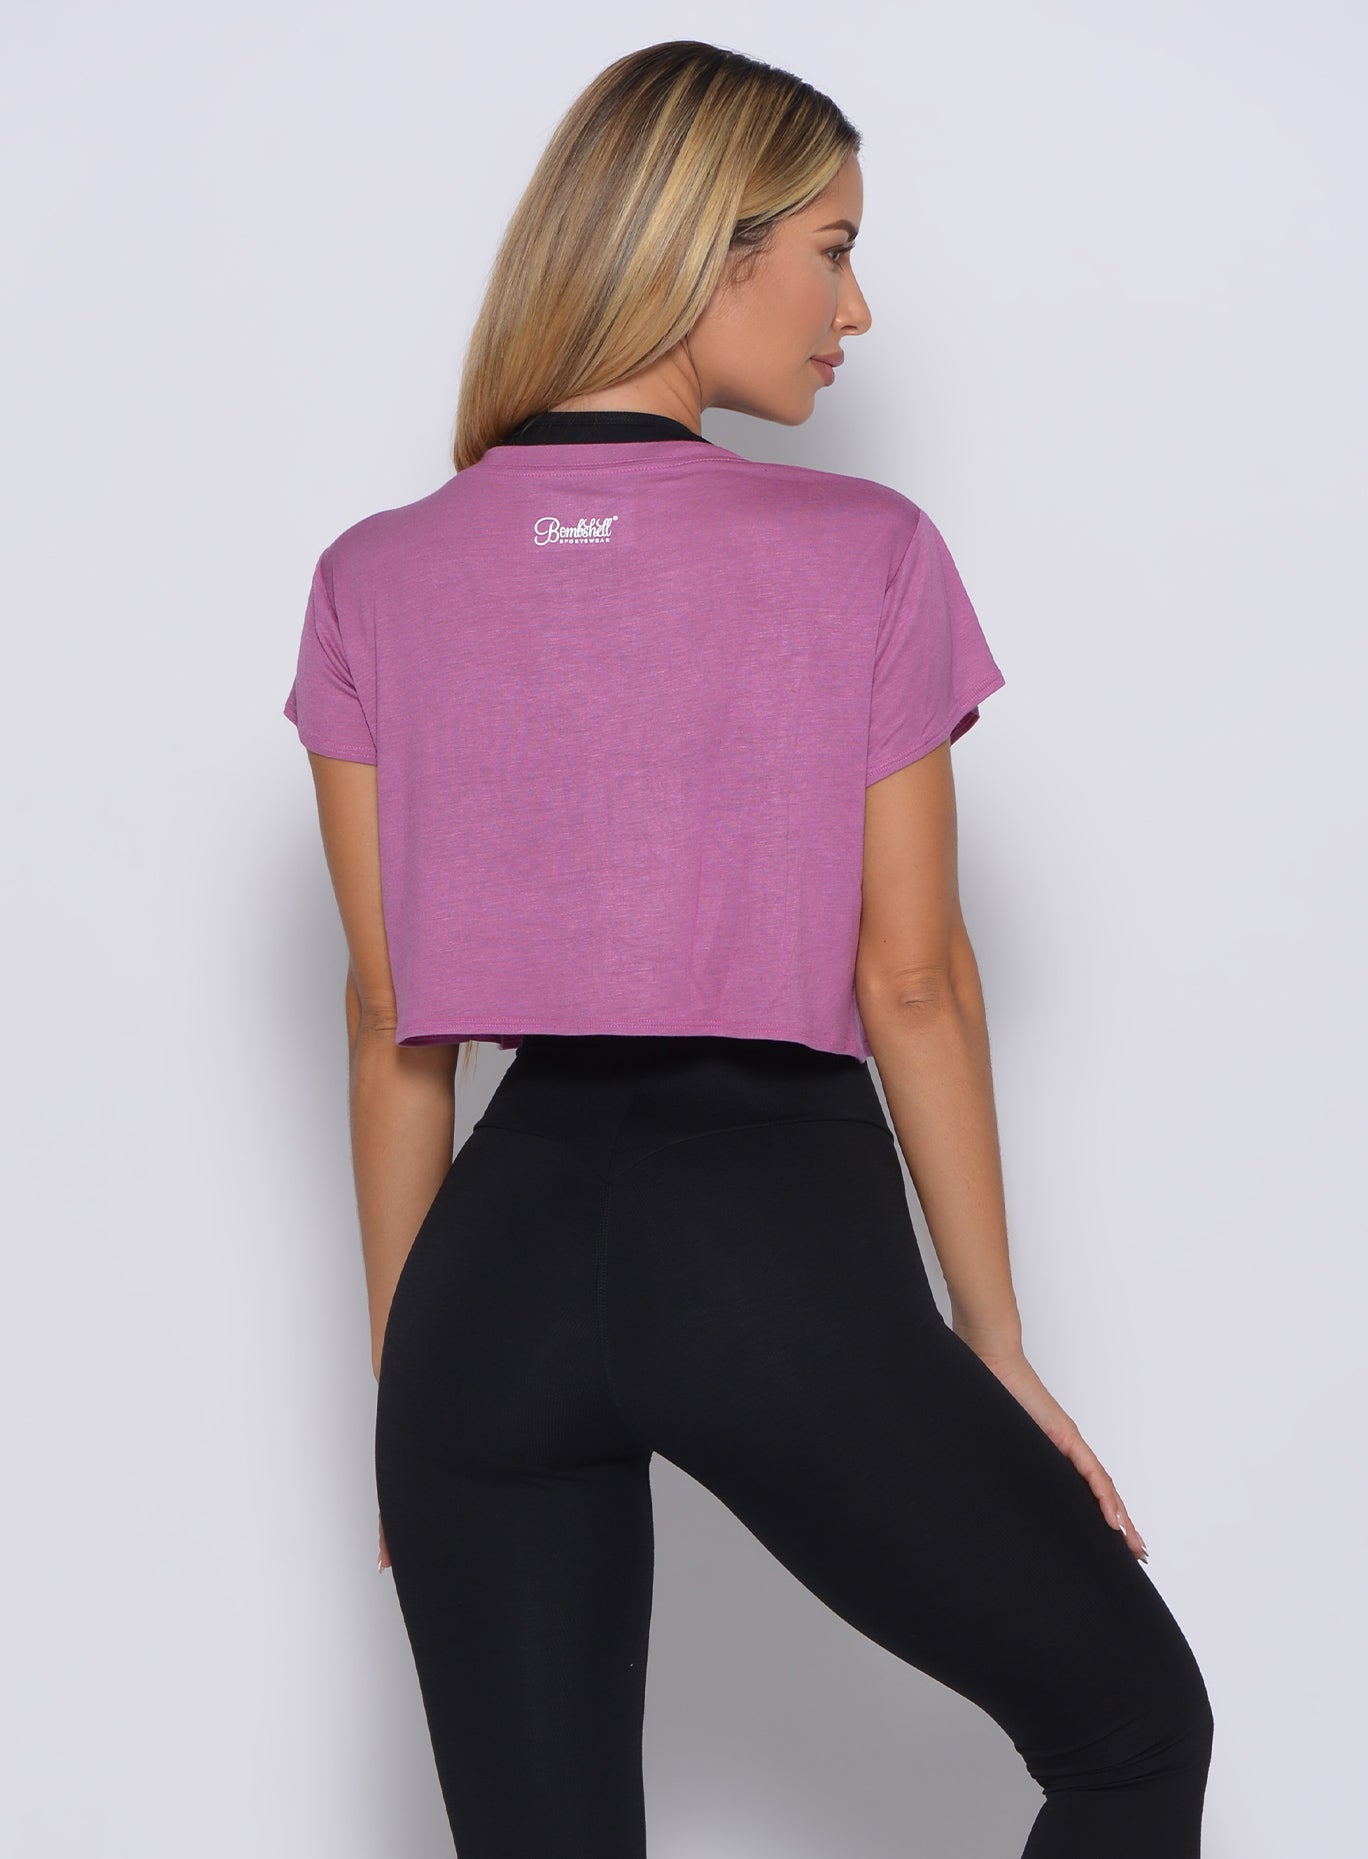 Back profile view of a model in our freedom tee in strawberry pink color and a black leggings